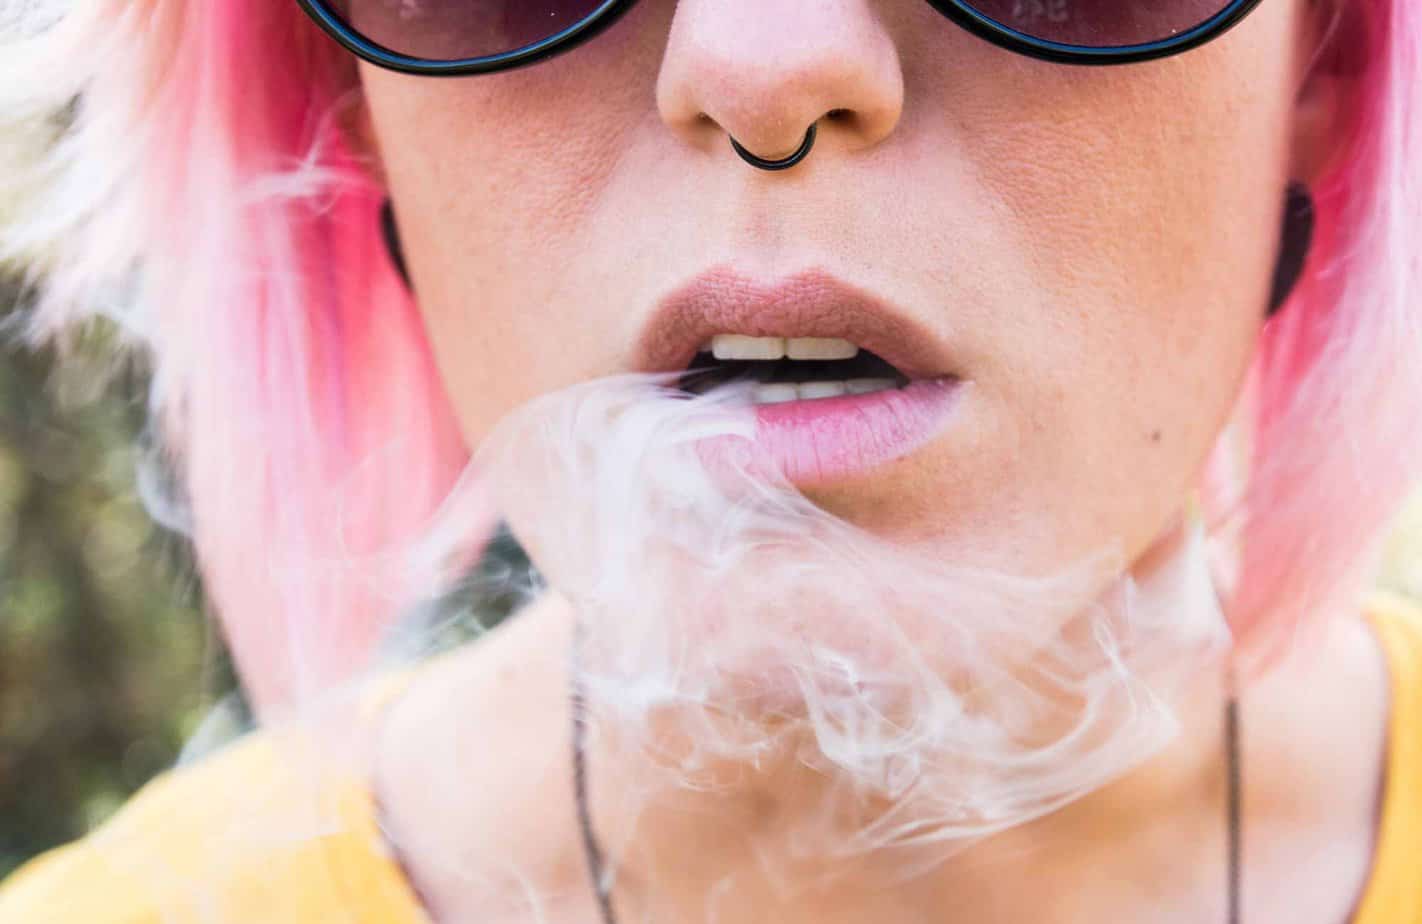 woman with pink hair smoking juul close up